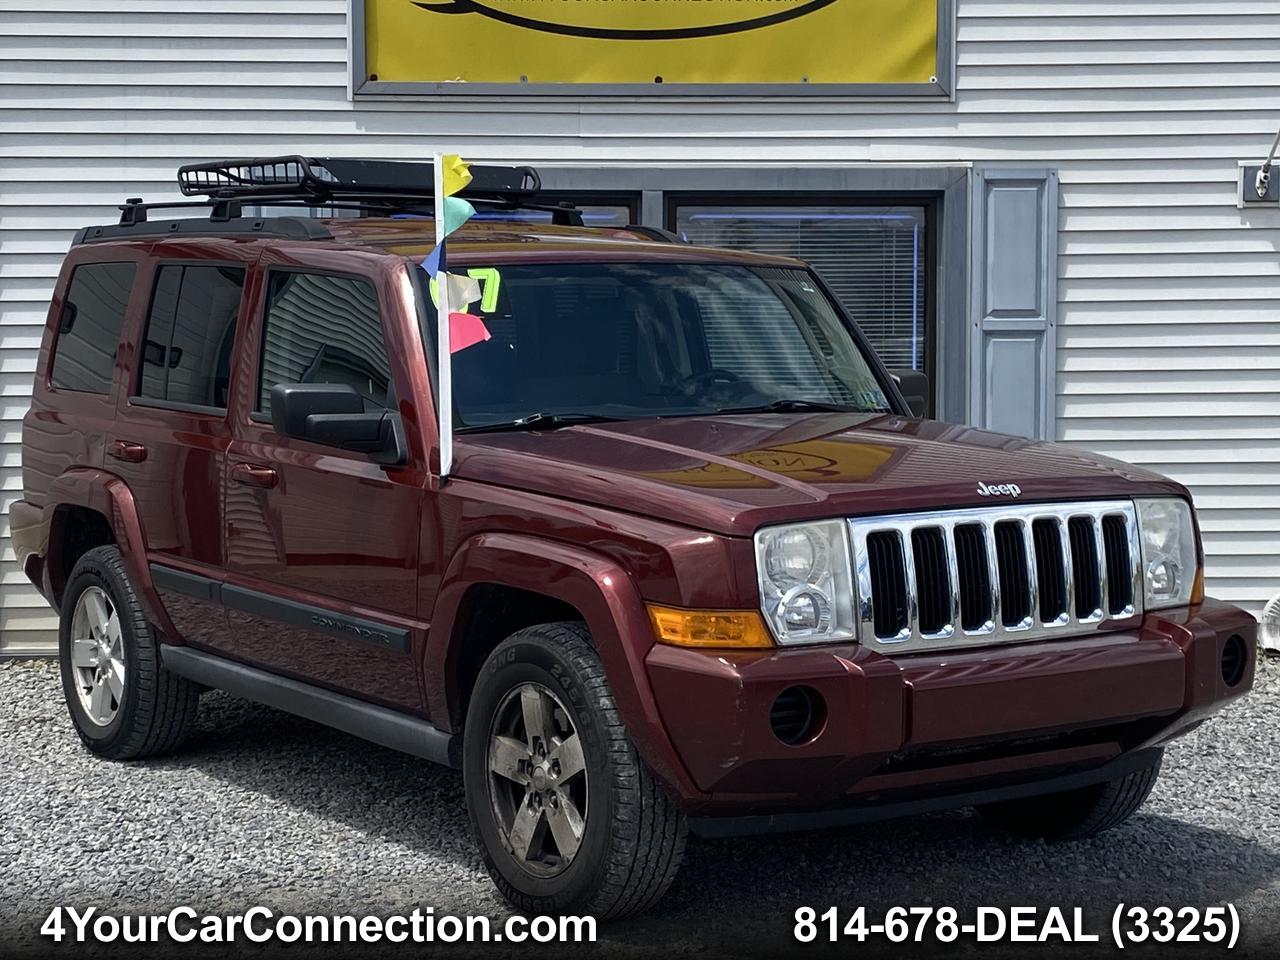 Used 2007 Jeep Commander 4WD 7-Passenger in Cranberry PA